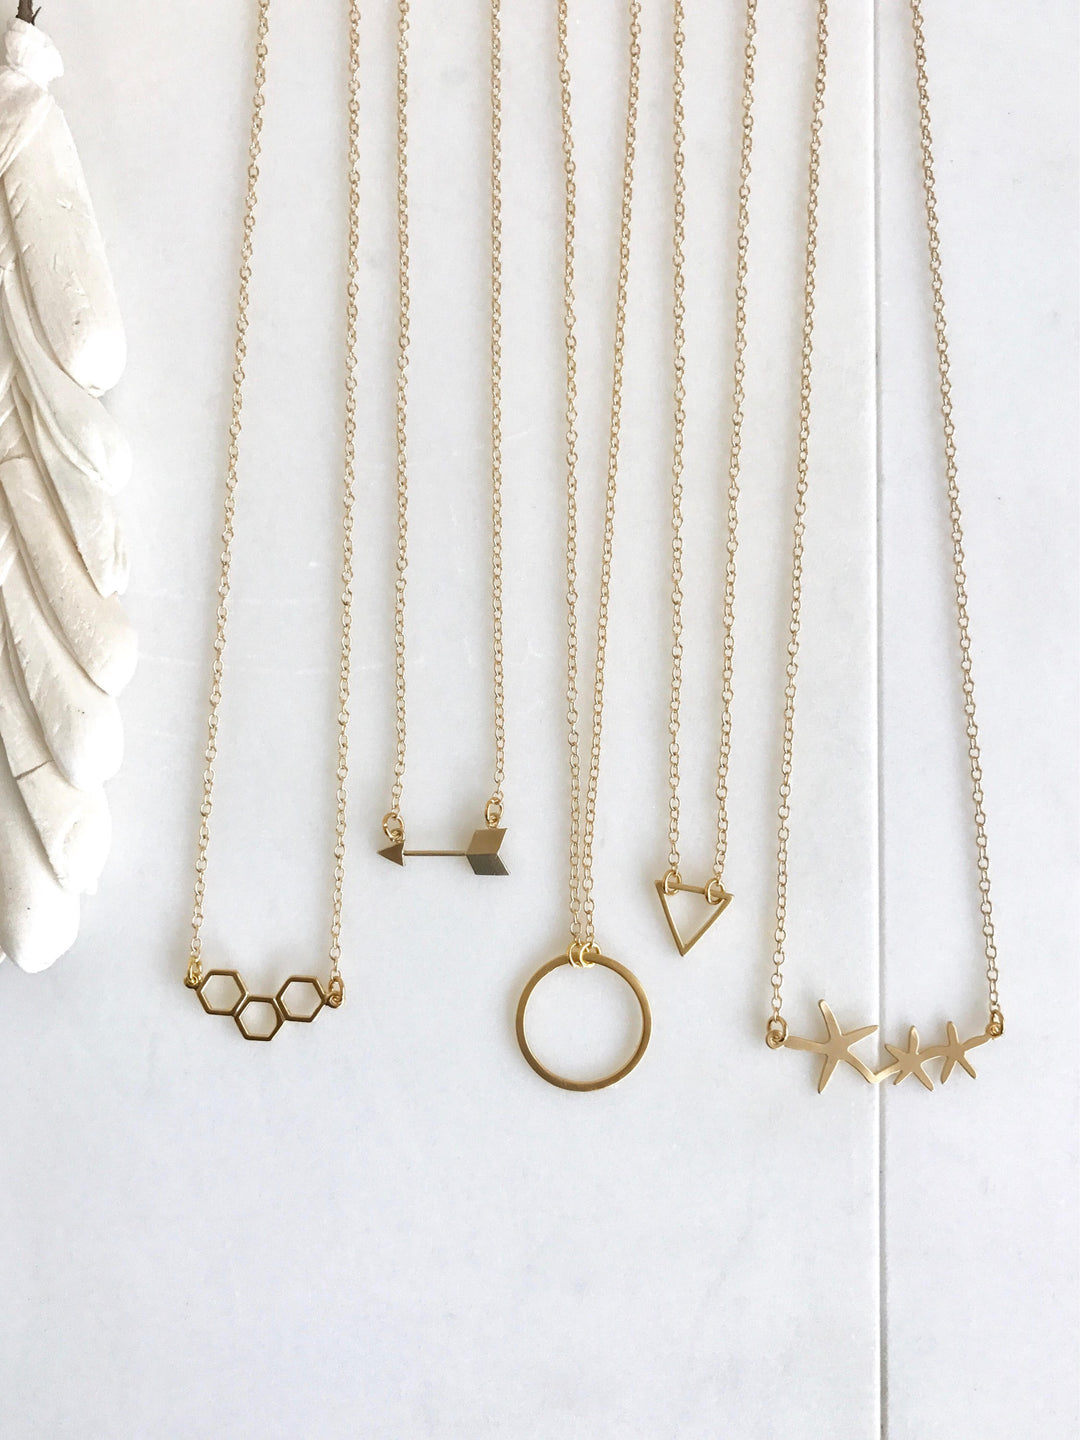 Gold Charm Simple Layering Necklace. Arrow Triangle Honeycomb Star Charm